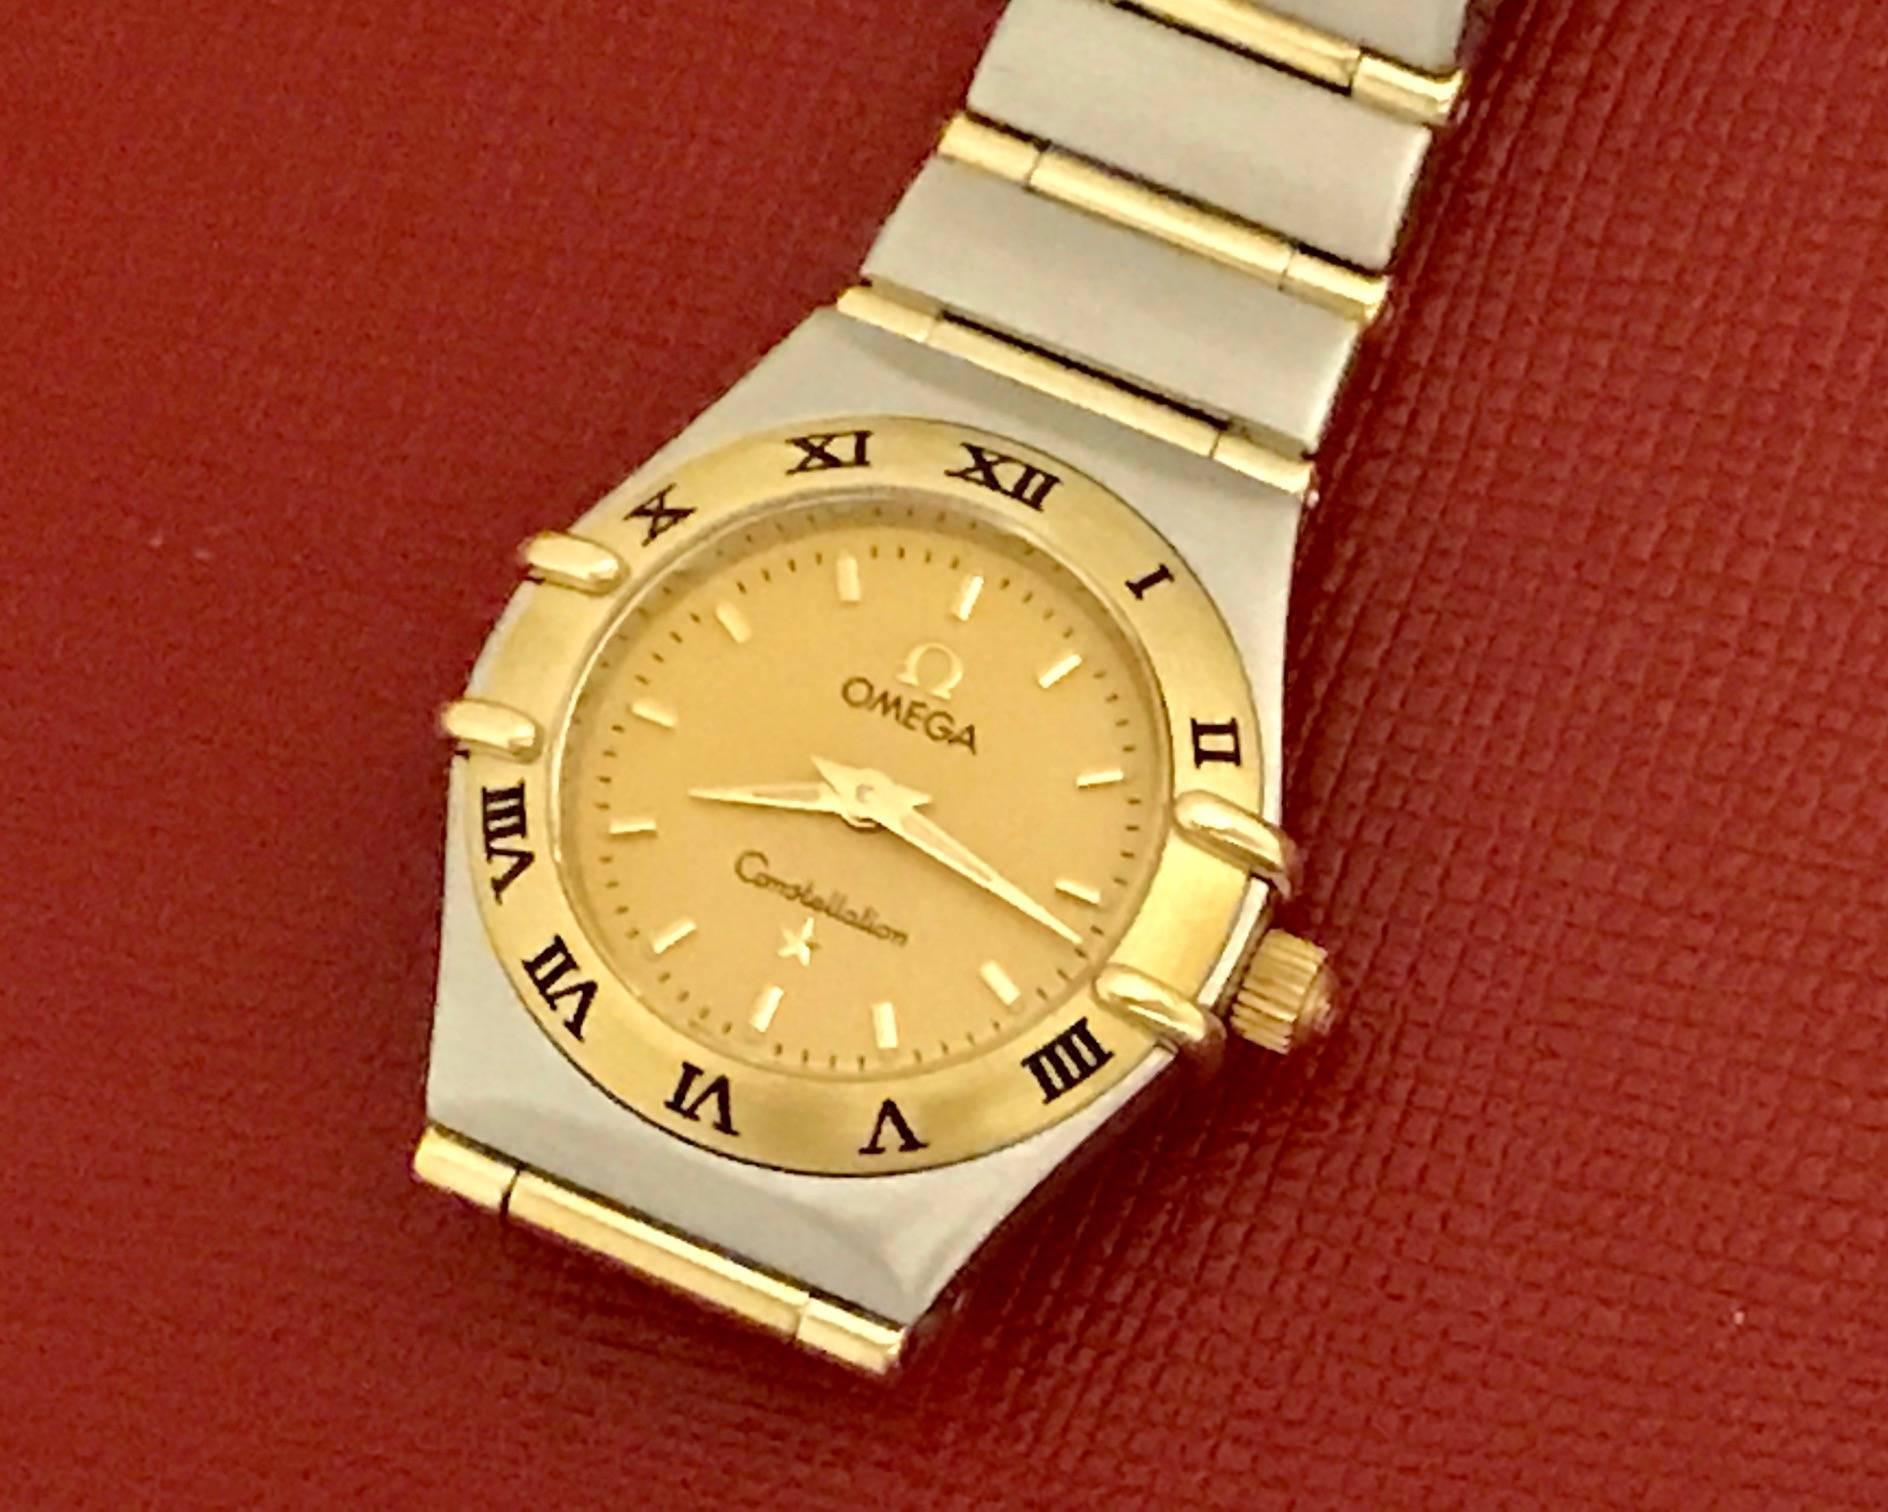 Omega Constellation ladies quartz pre-owned wrist watch. This beautiful classic Omega features a champagne dial with polished hour markers and classic stainless steel case with 18k bezel adorned with black roman numerals. Measures 23mm. This watch